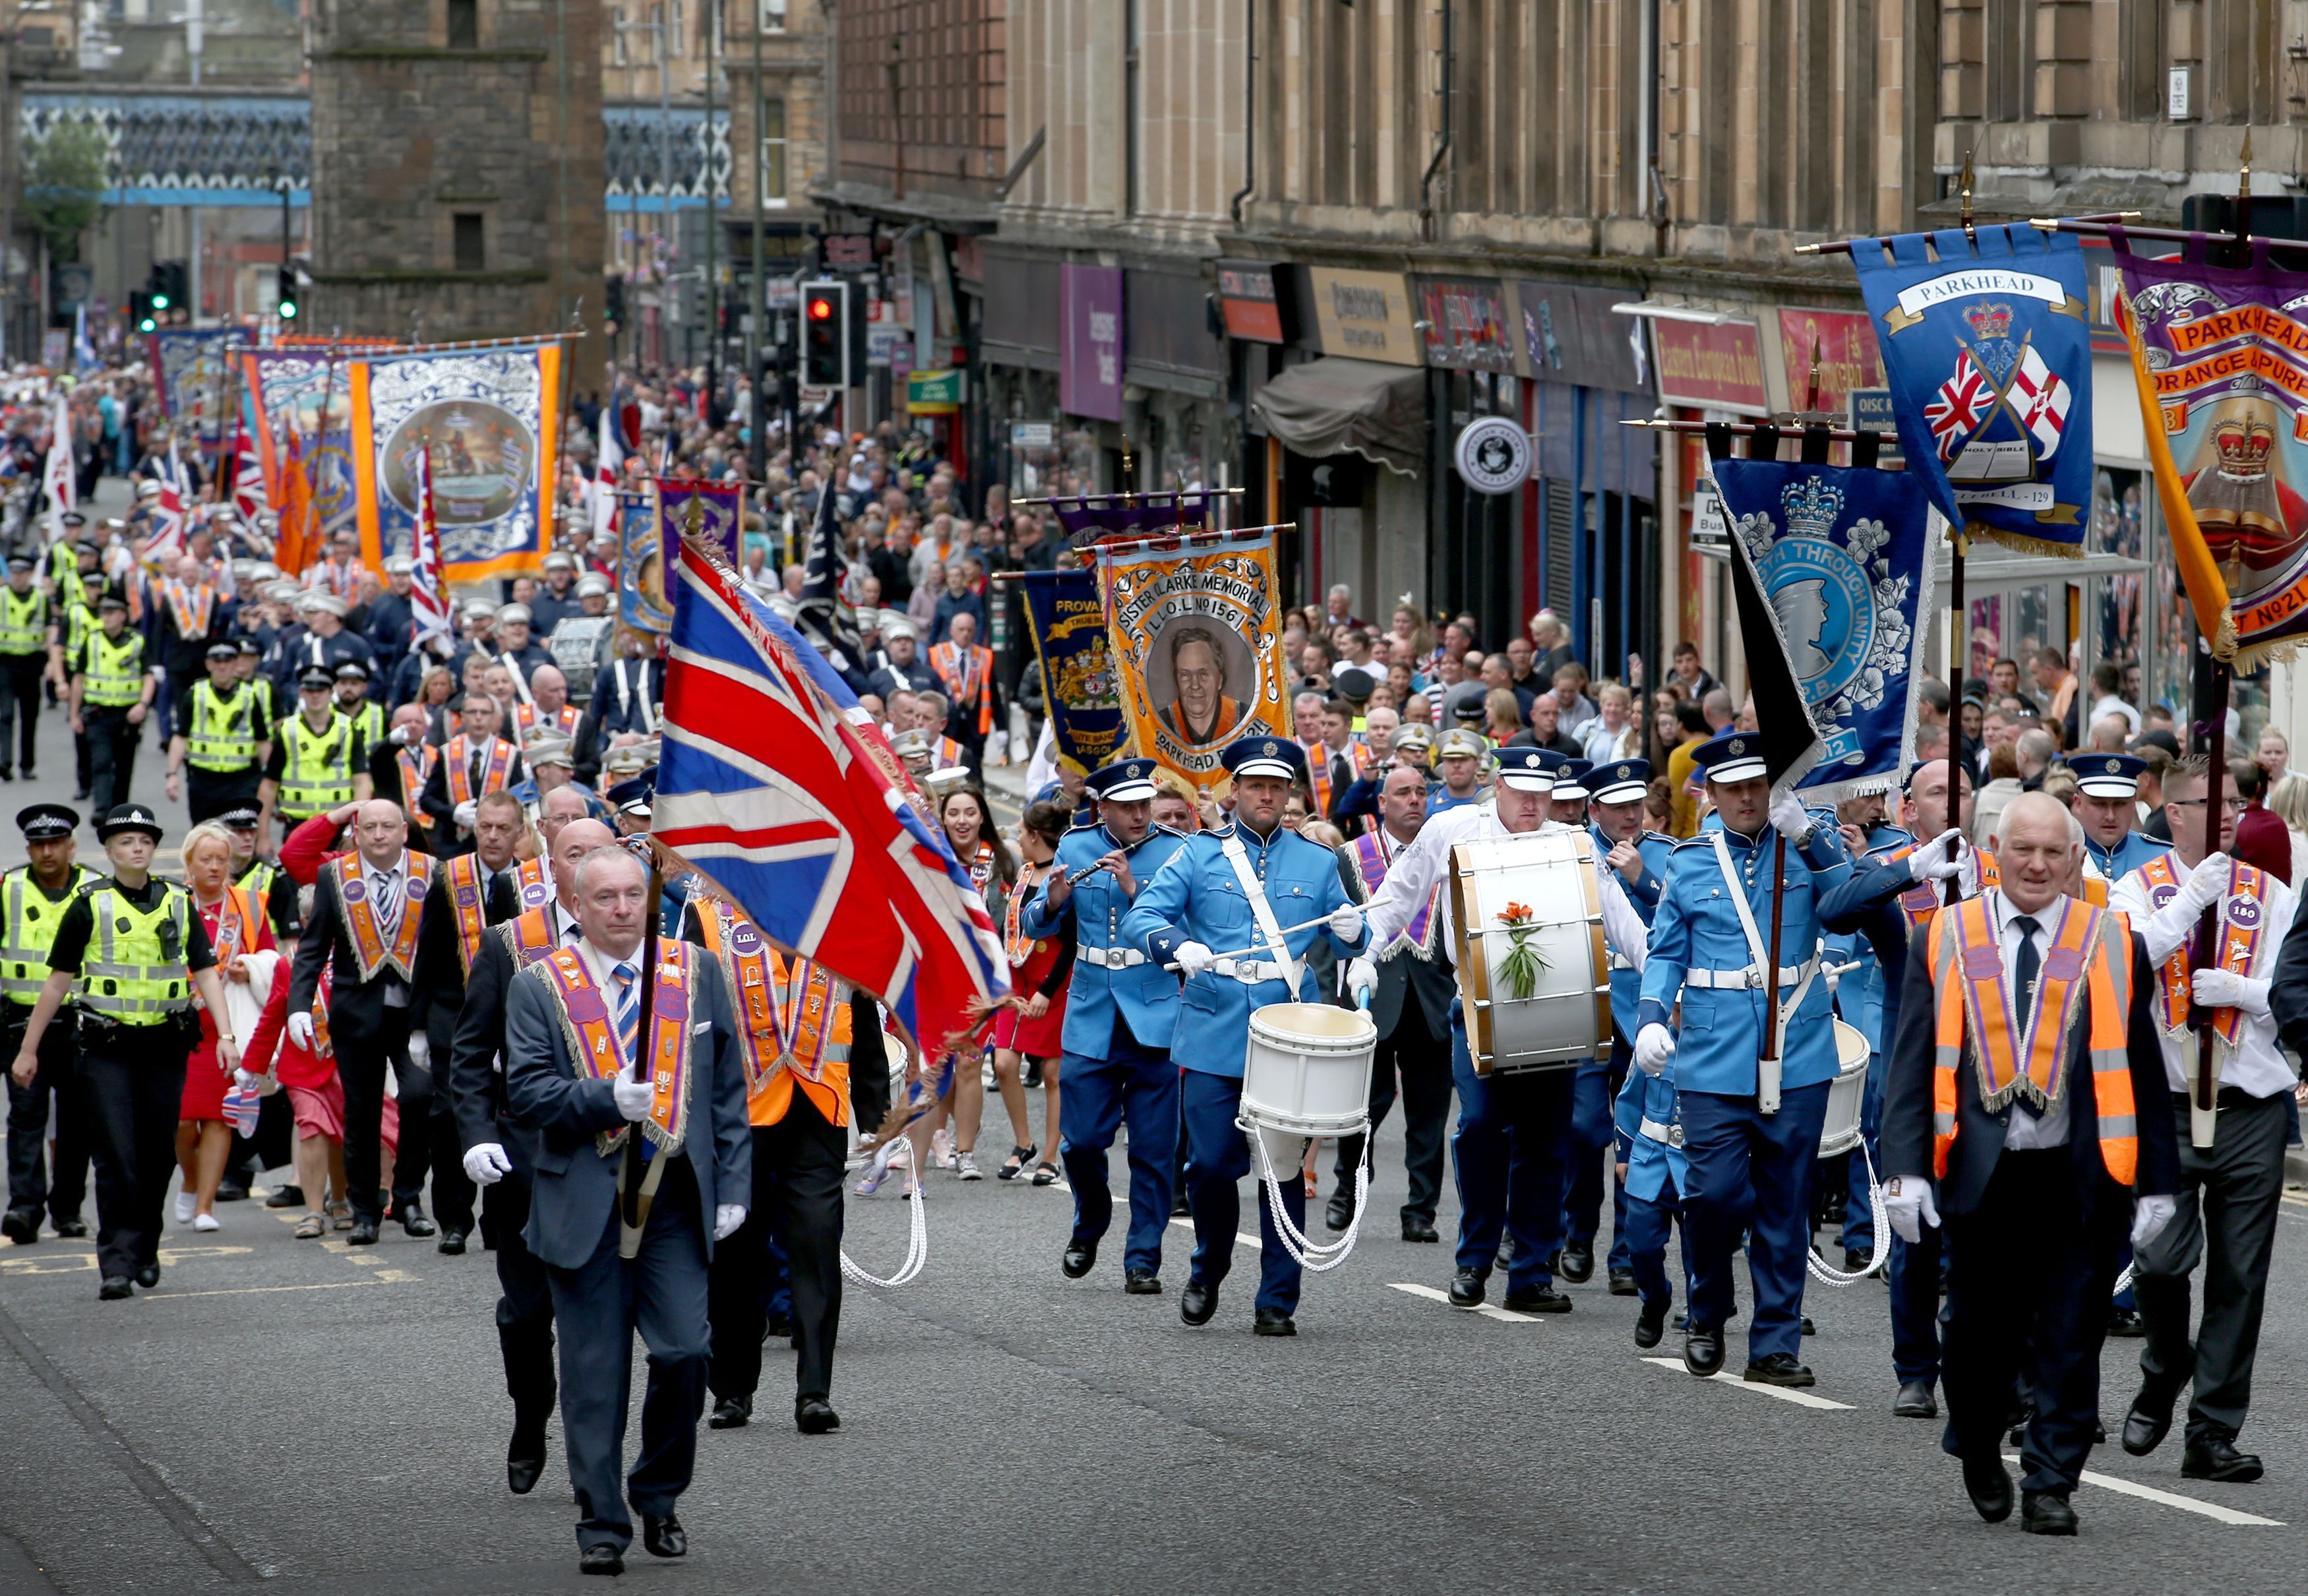 Orange march in Glasgow called off after attack on priest